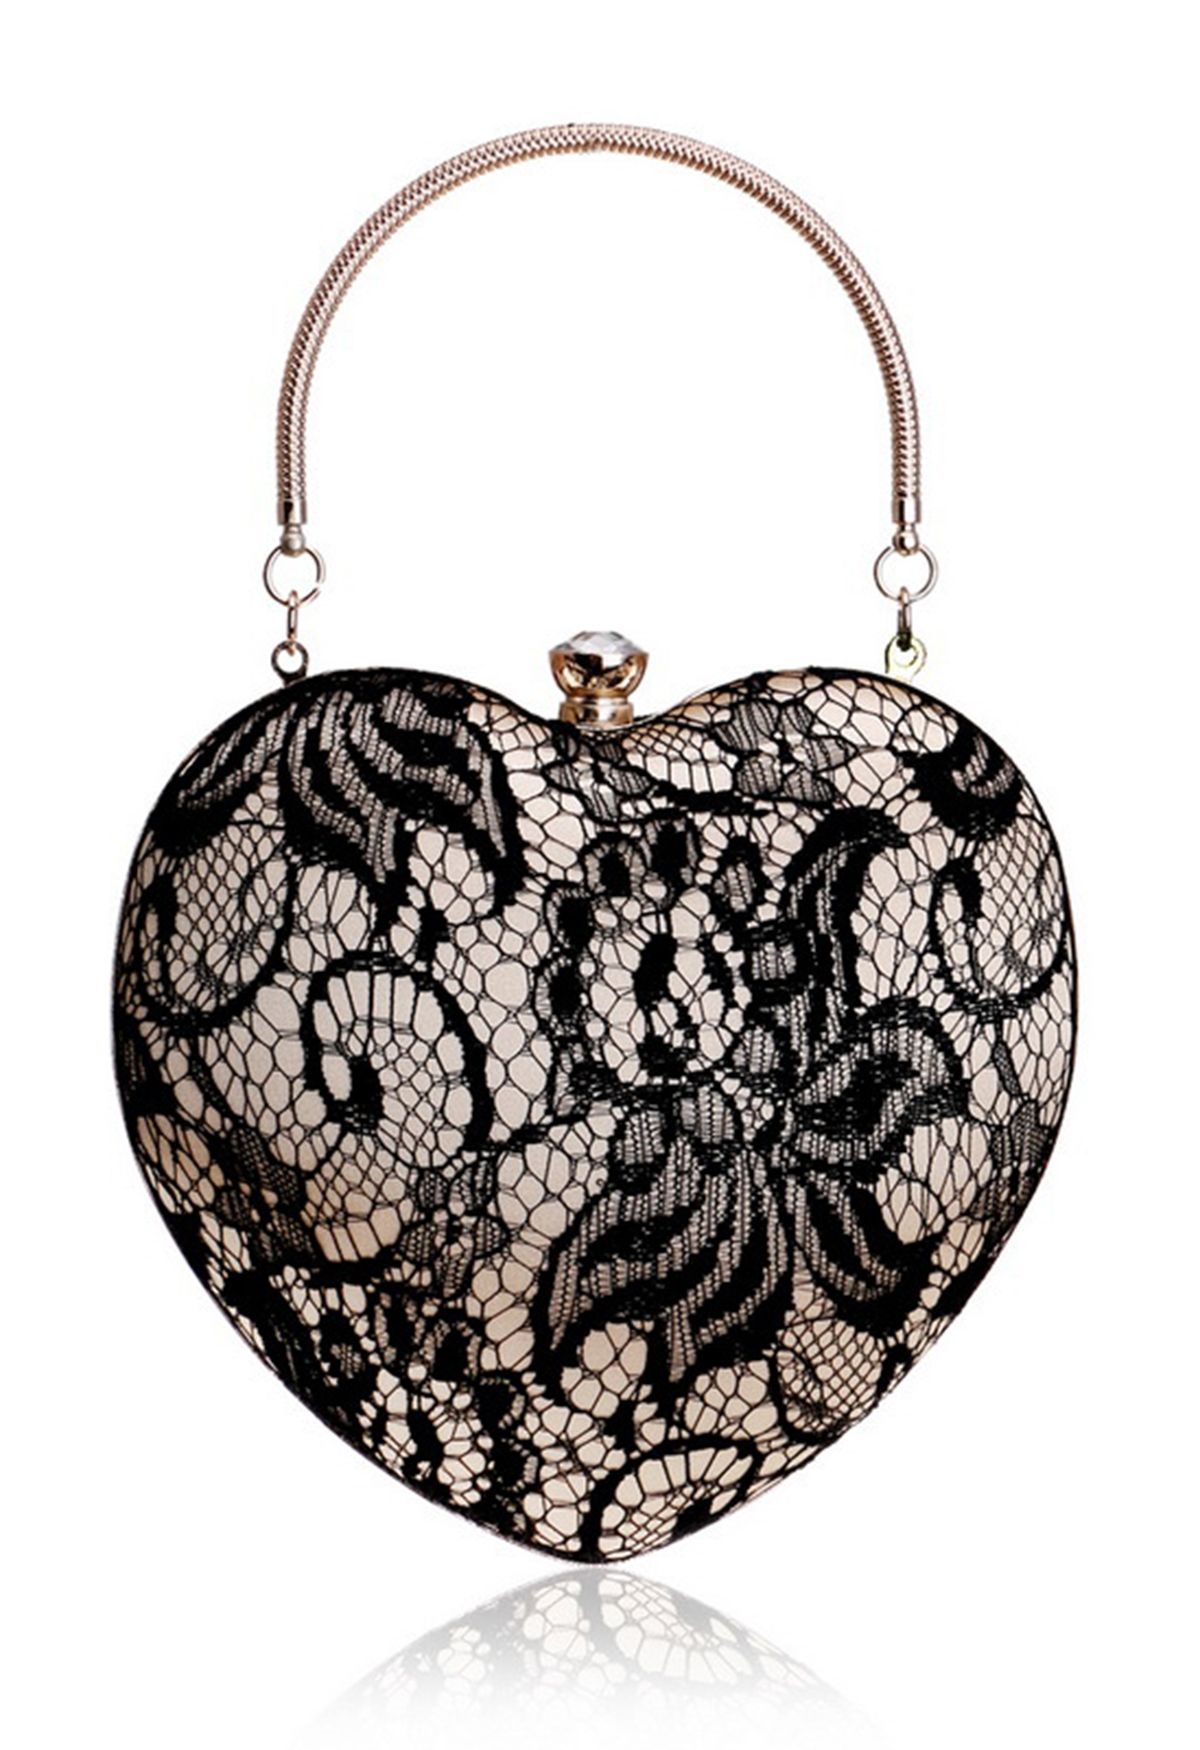 Mysterious Lace Heart Shape Clutch in Black | Chicwish